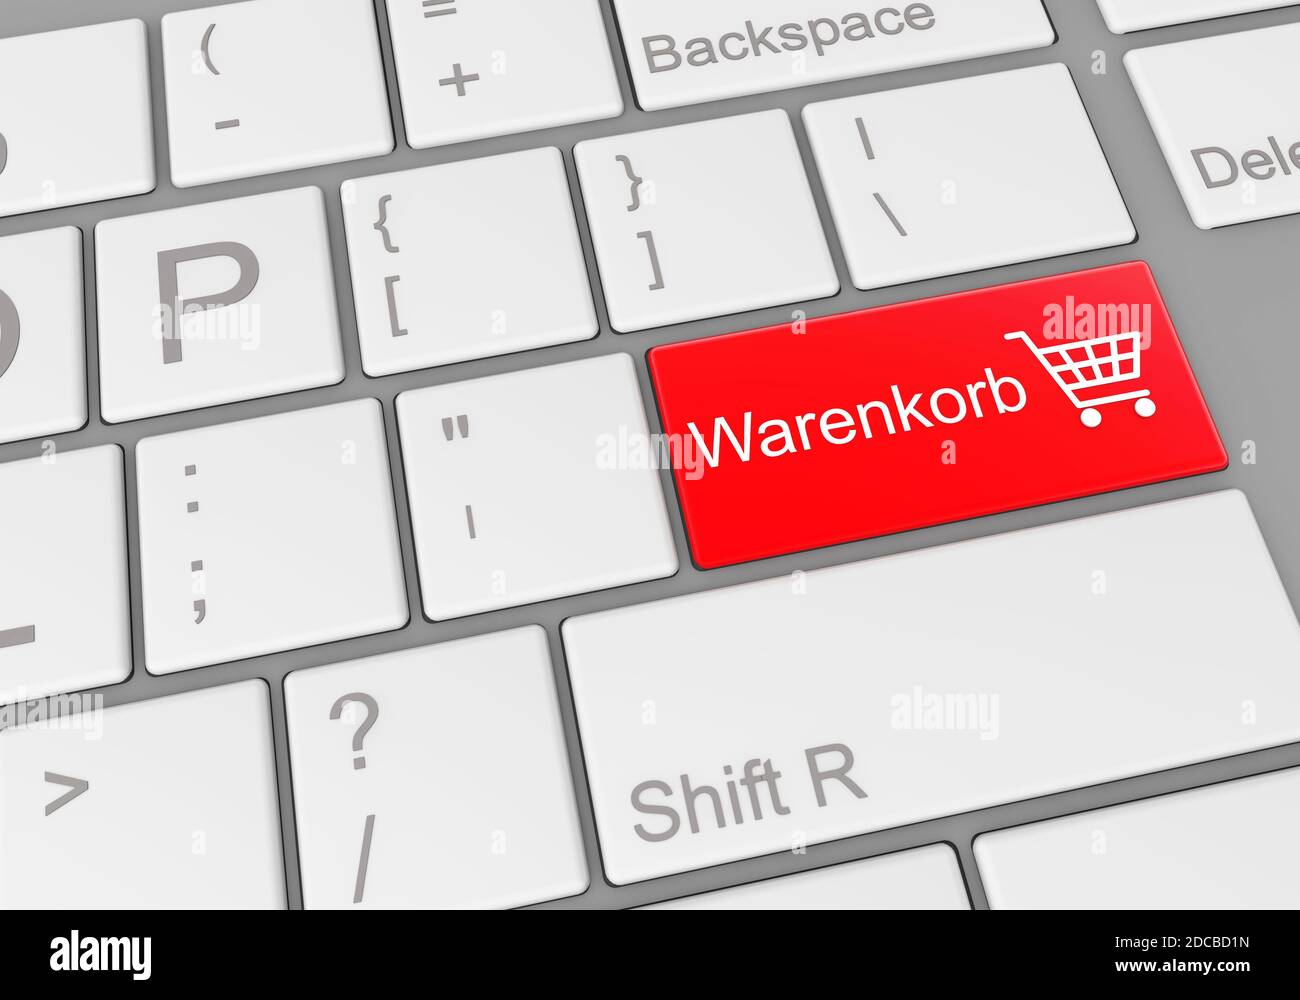 A special 'warenkorb' button on a laptop keyboard Stock Photo